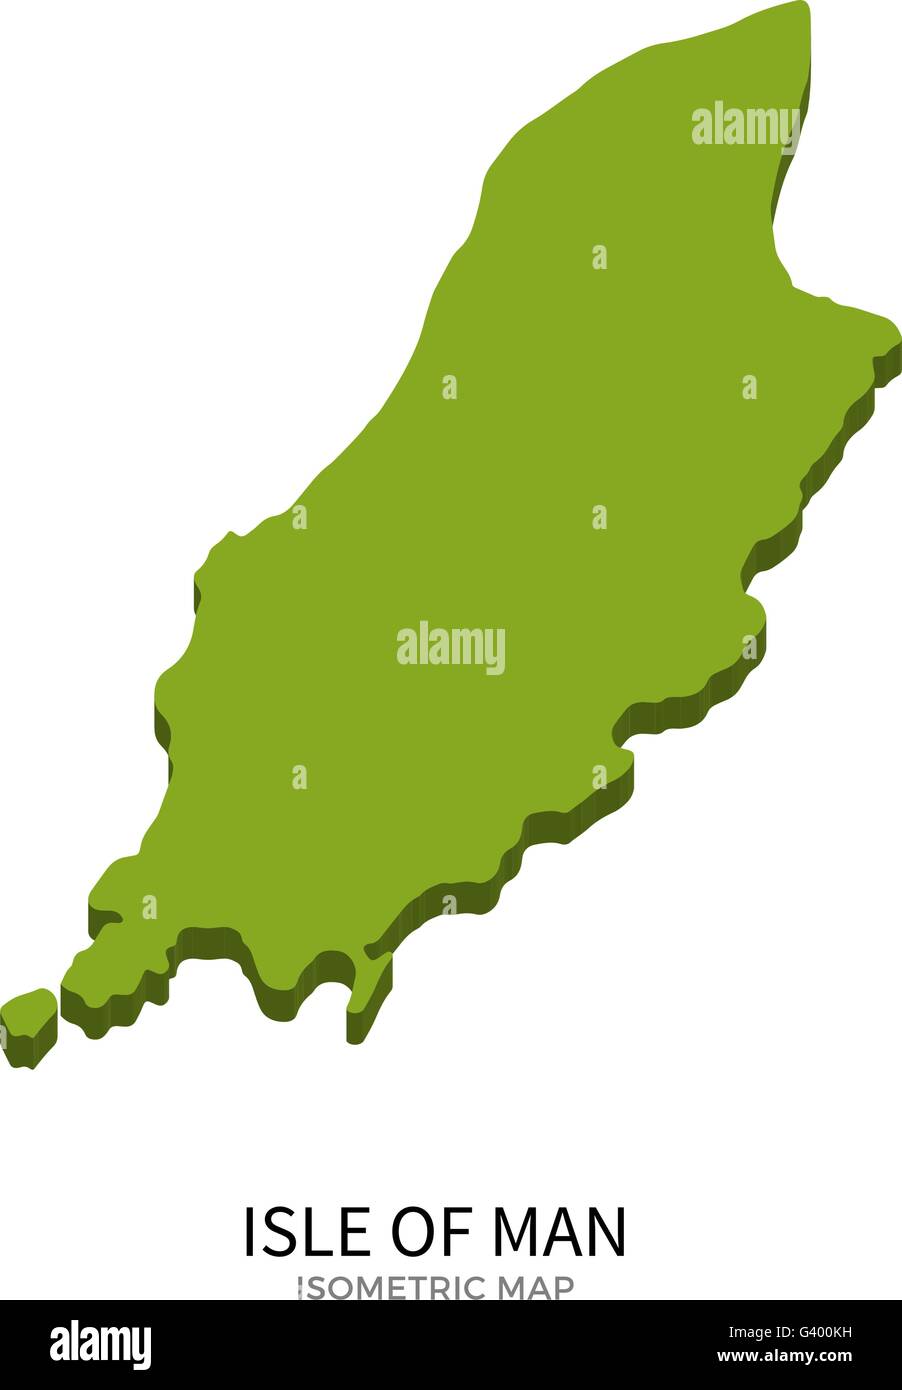 Isometric map of Isle of Man detailed vector illustration Stock Vector